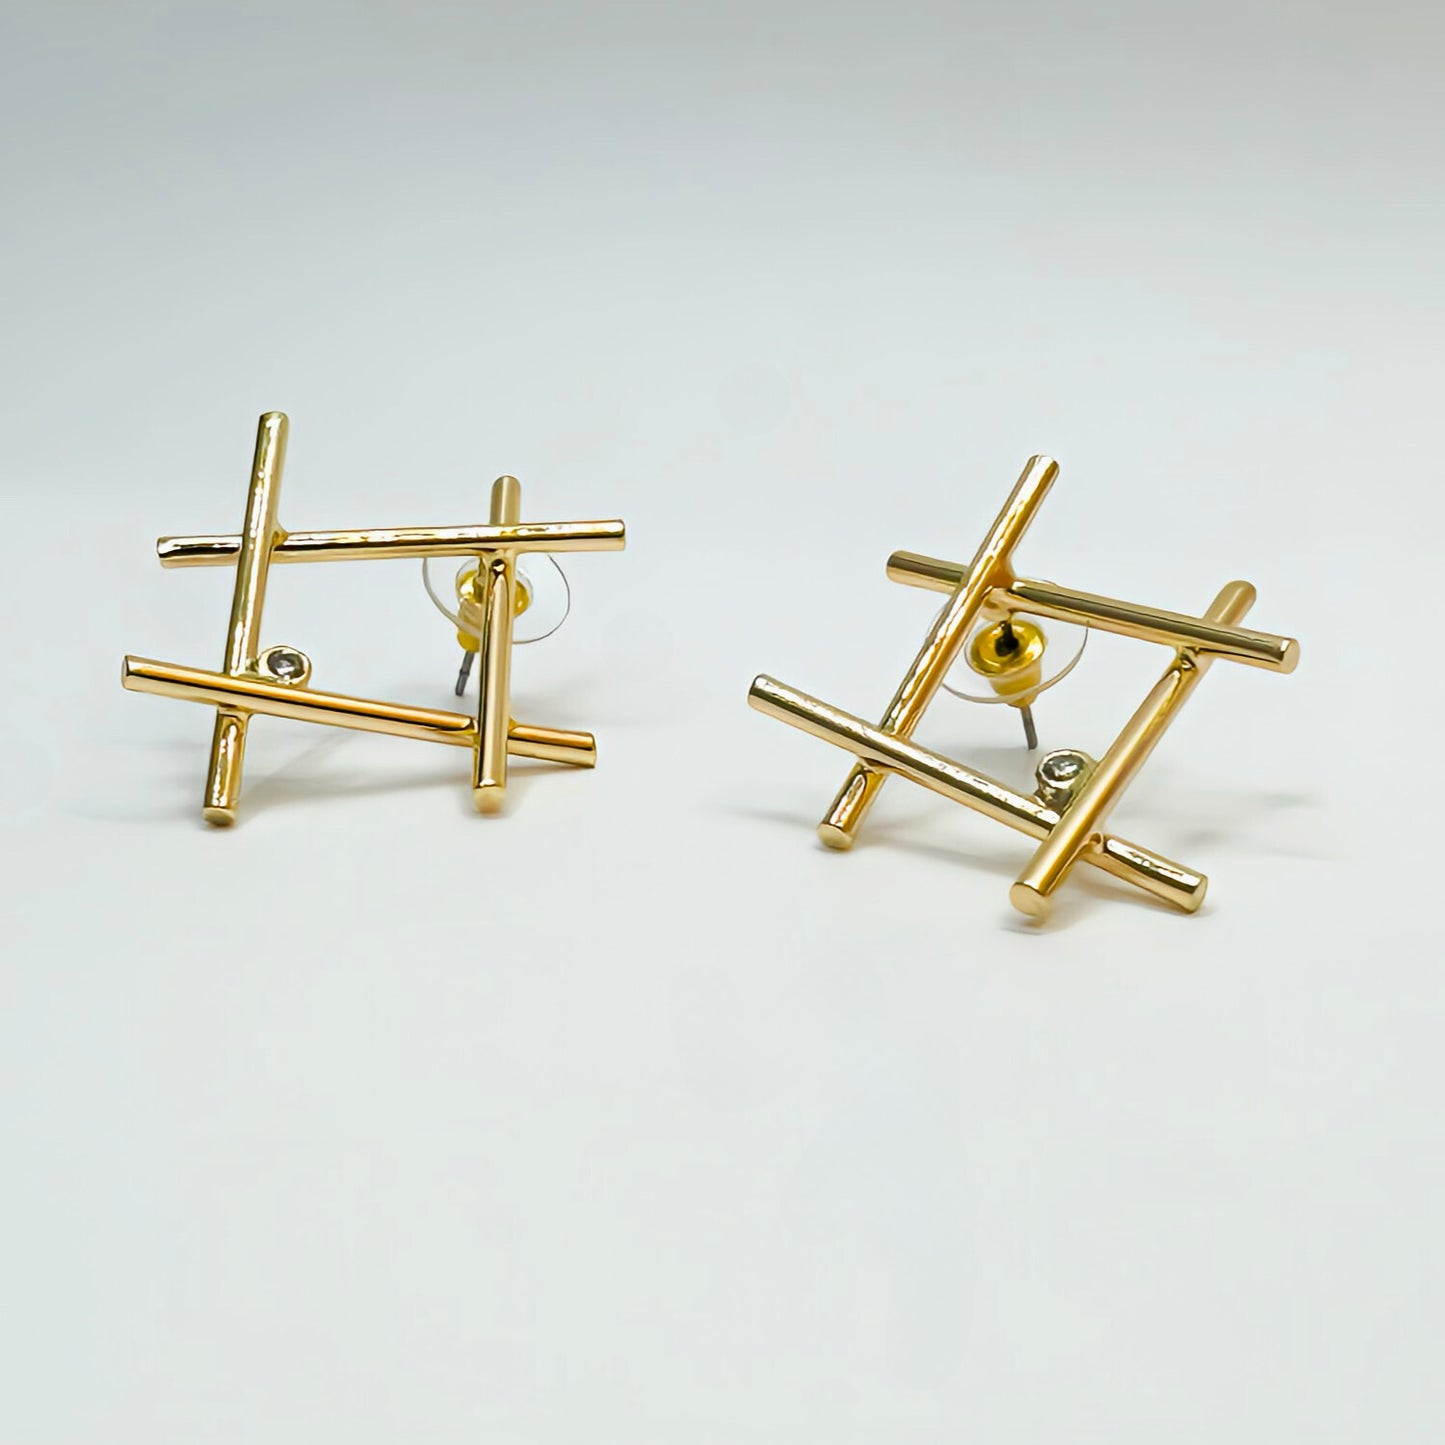 Art Deco Fence Earrings Gold or Silver with Stainless Steel